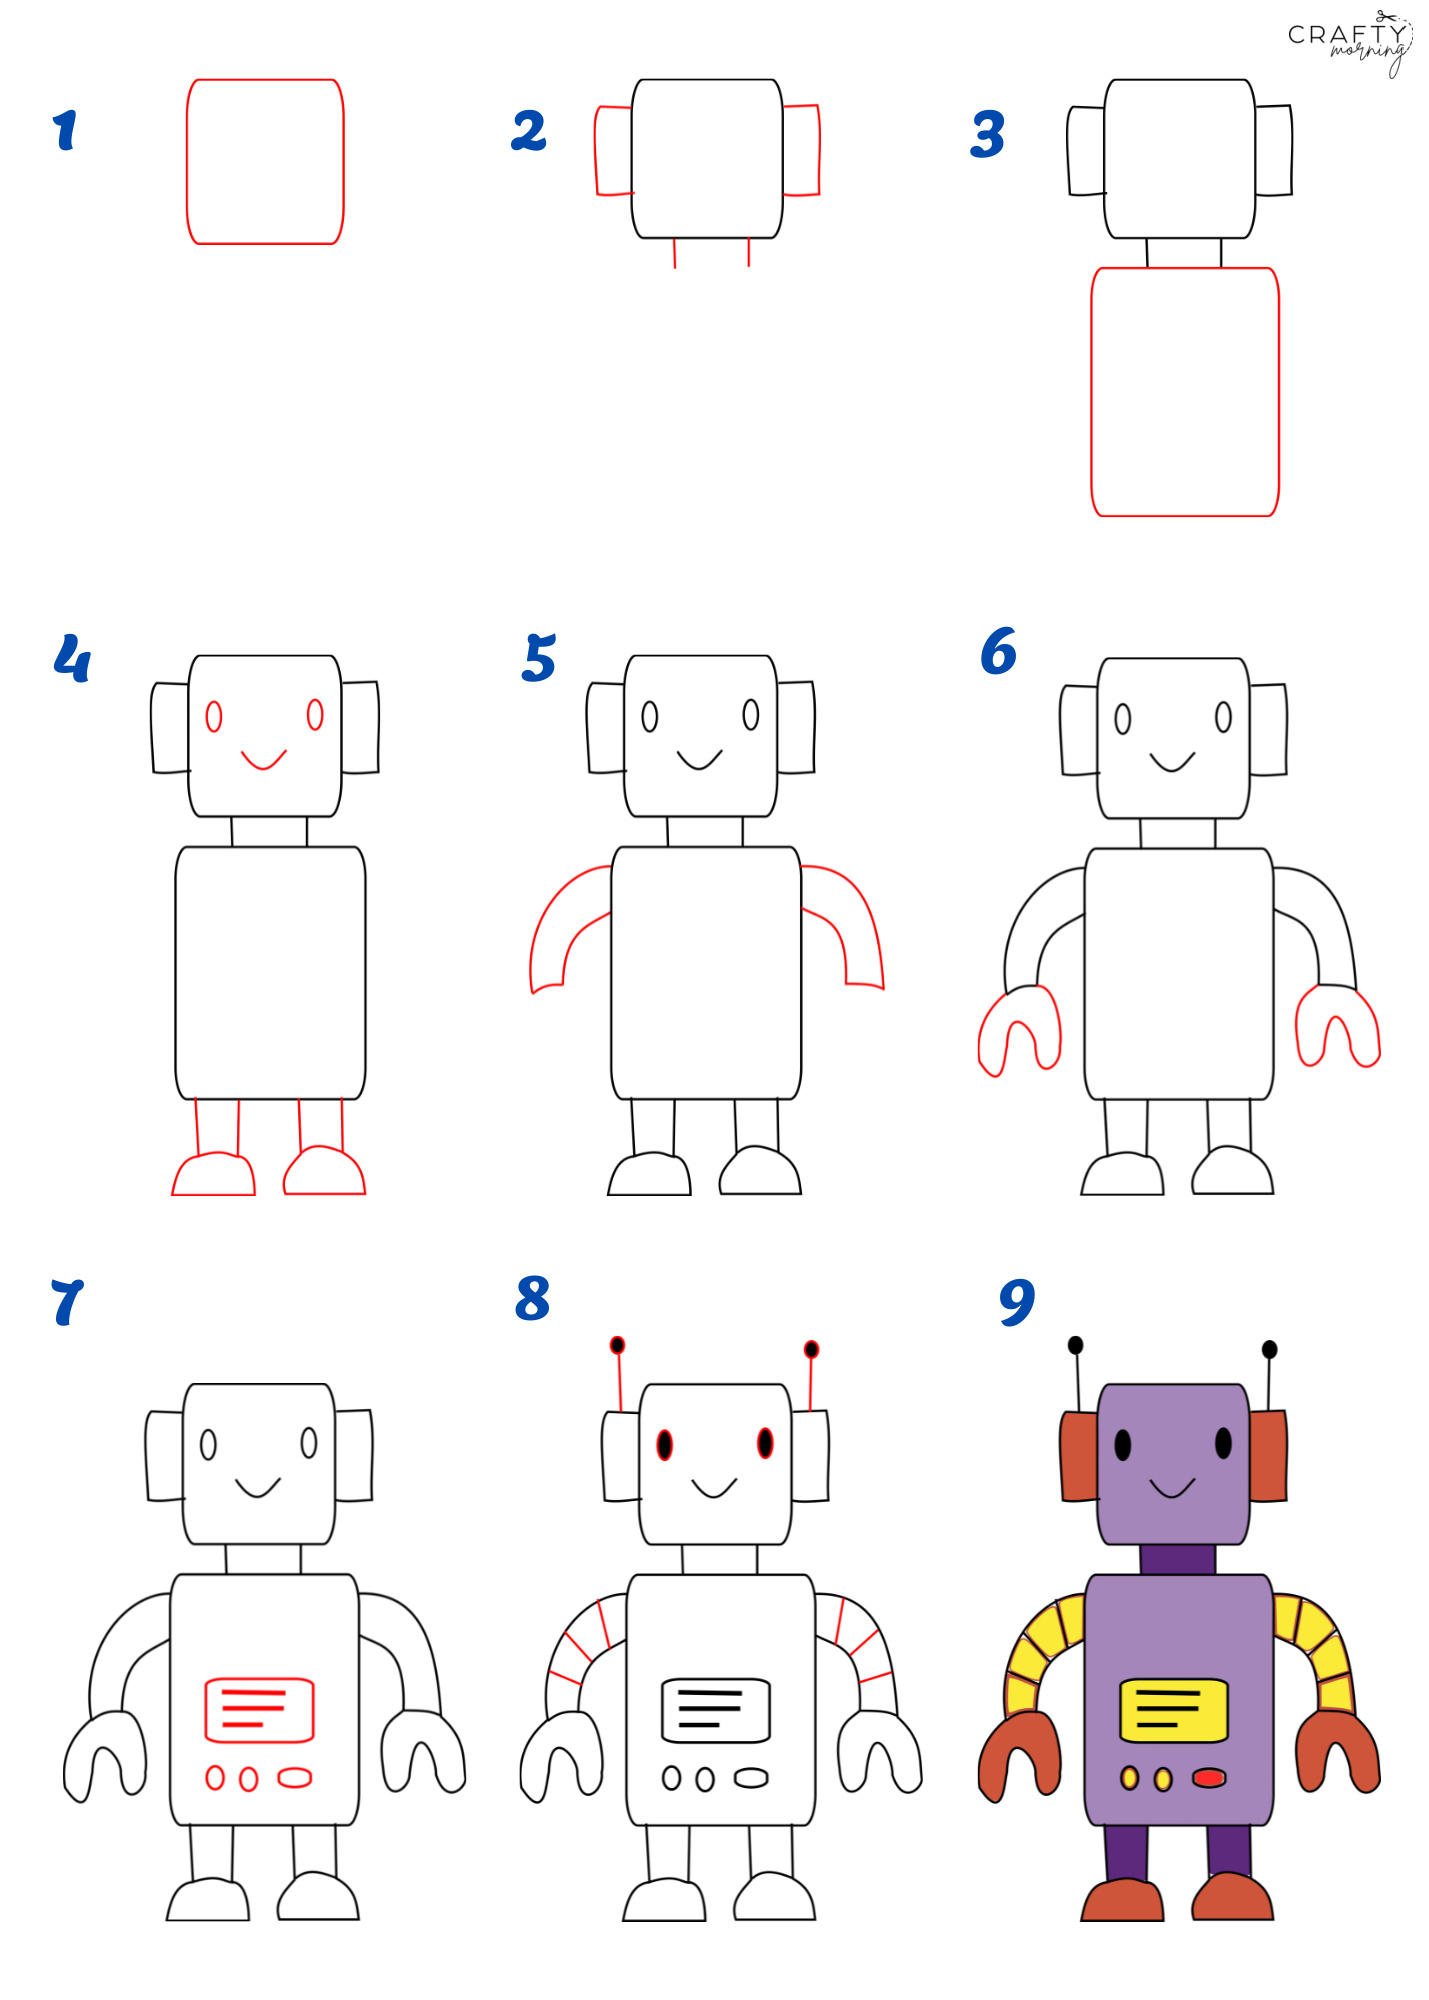 How to draw a robot | Easy step by step drawing - YouTube